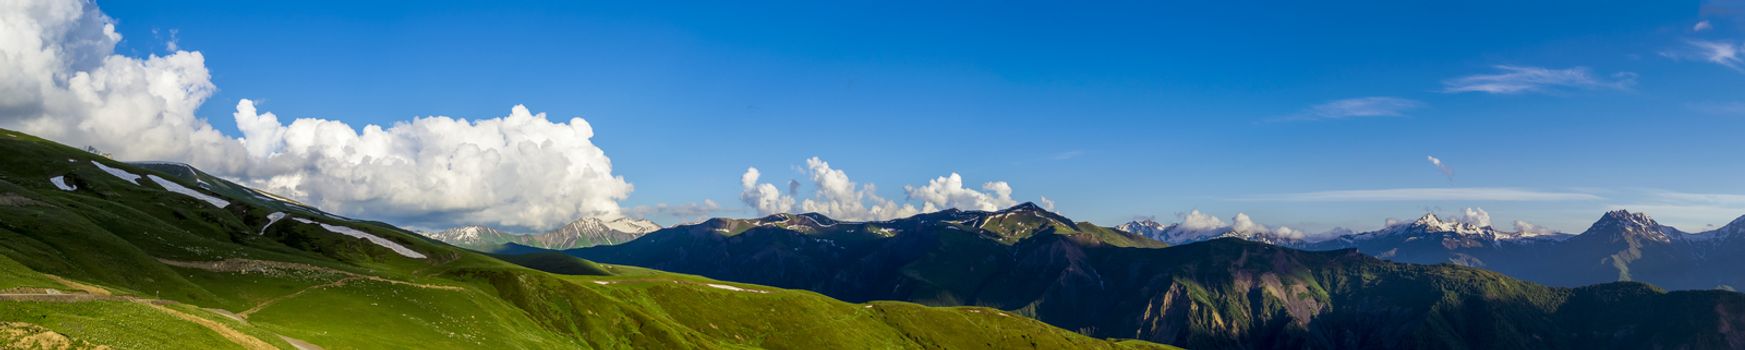 Wide mountain panorama.Green hills with snow on peaks in evening sunlight. Dark shadows. Blue sky with some clouds. Summer in Georgia.